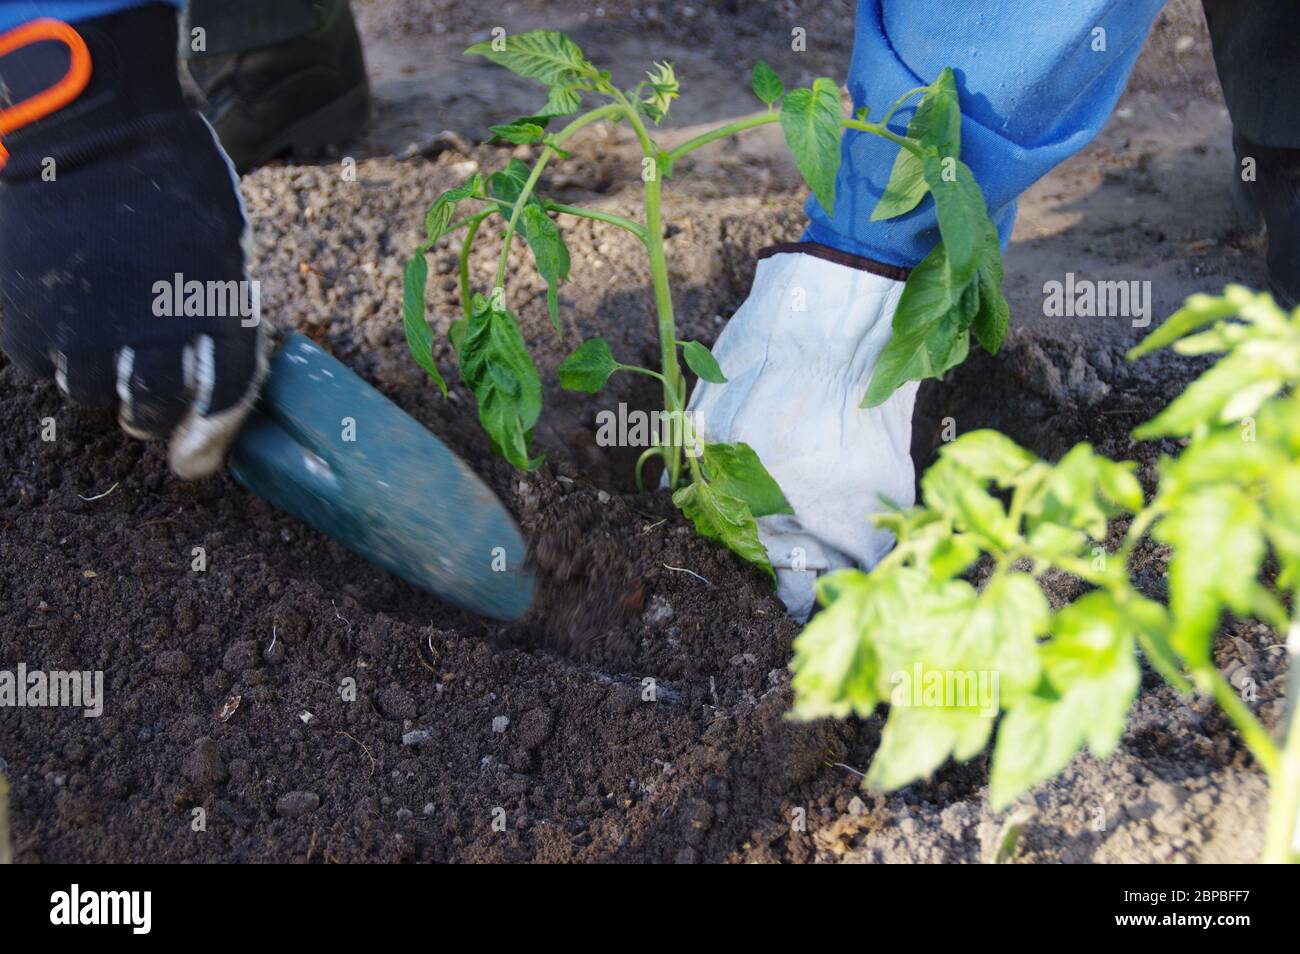 Planting tomatoes into soil. Spring season and work in the home garden. Natural organic gardening. Stock Photo